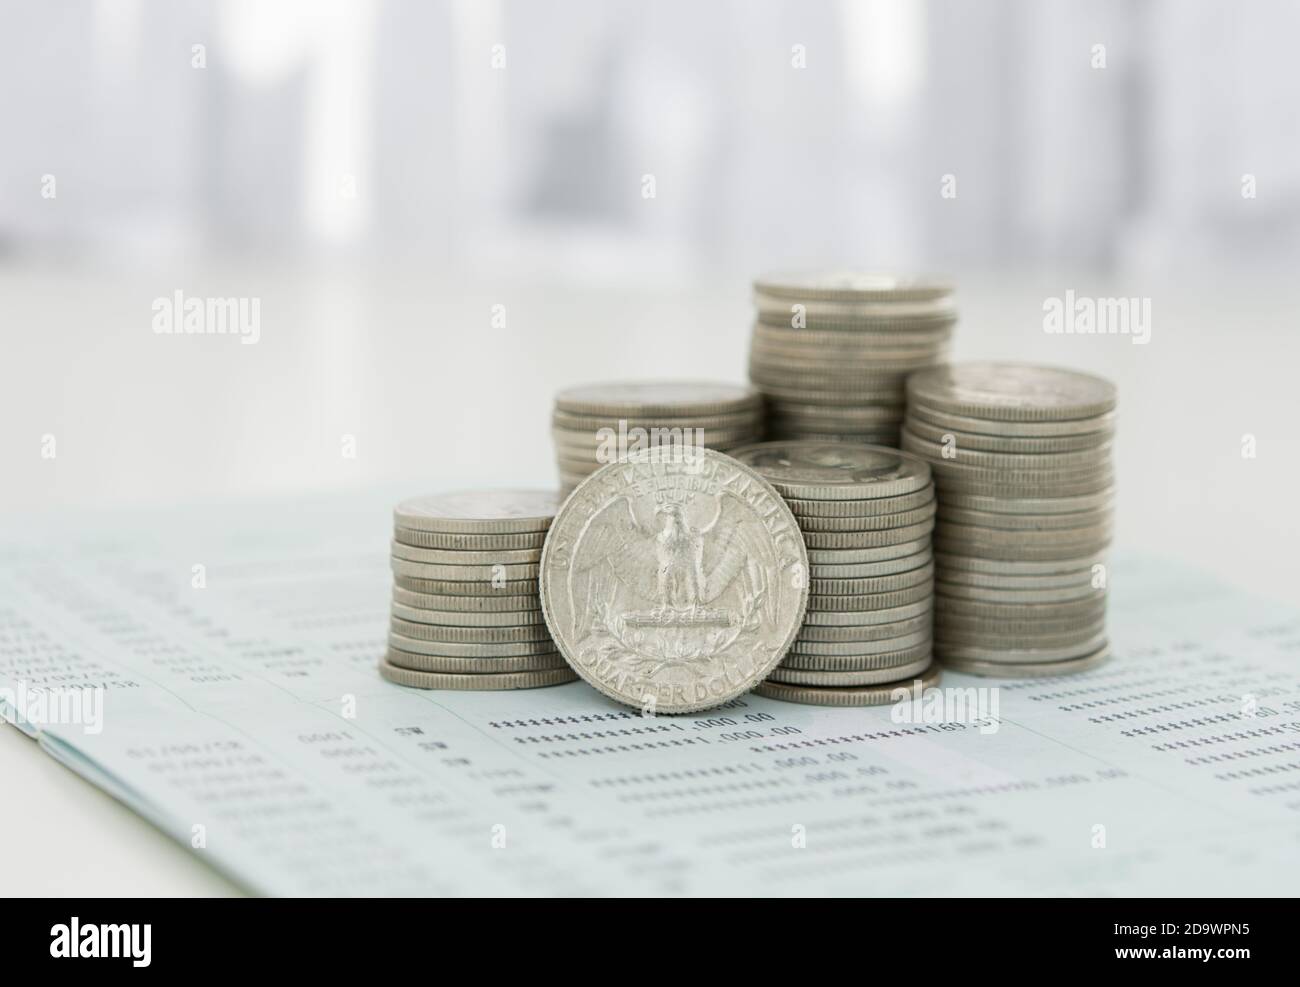 Coin stack on bank passbook with city in background. Savings, Finance and Banking, Investing, Business Investment Growth Concept. Stock Photo